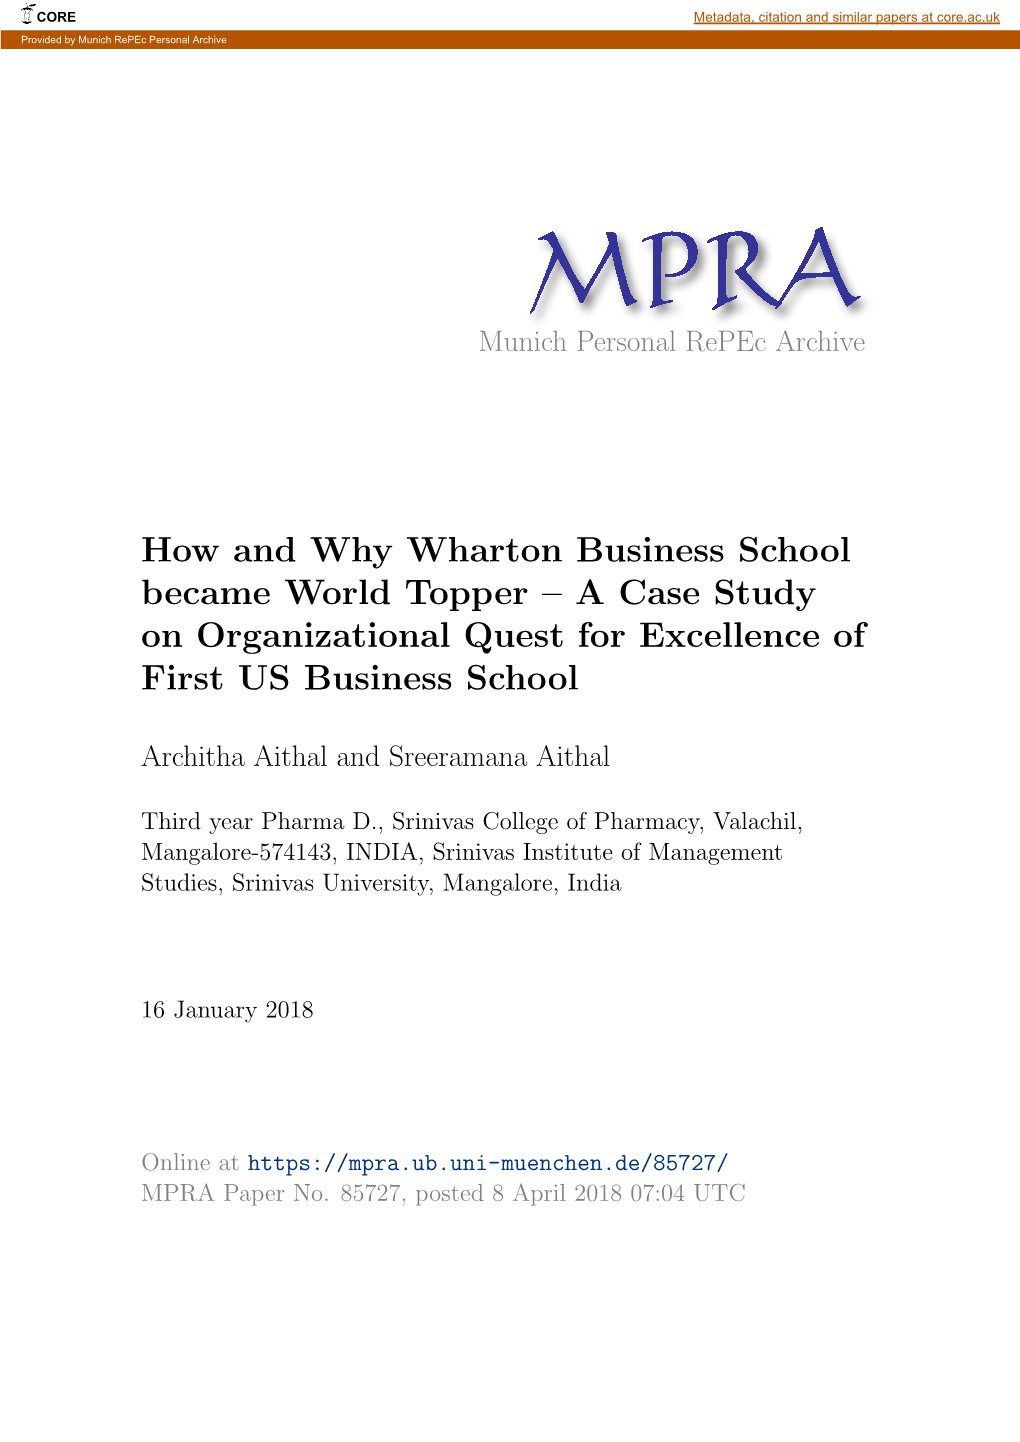 How and Why Wharton Business School Became World Topper – a Case Study on Organizational Quest for Excellence of First US Business School